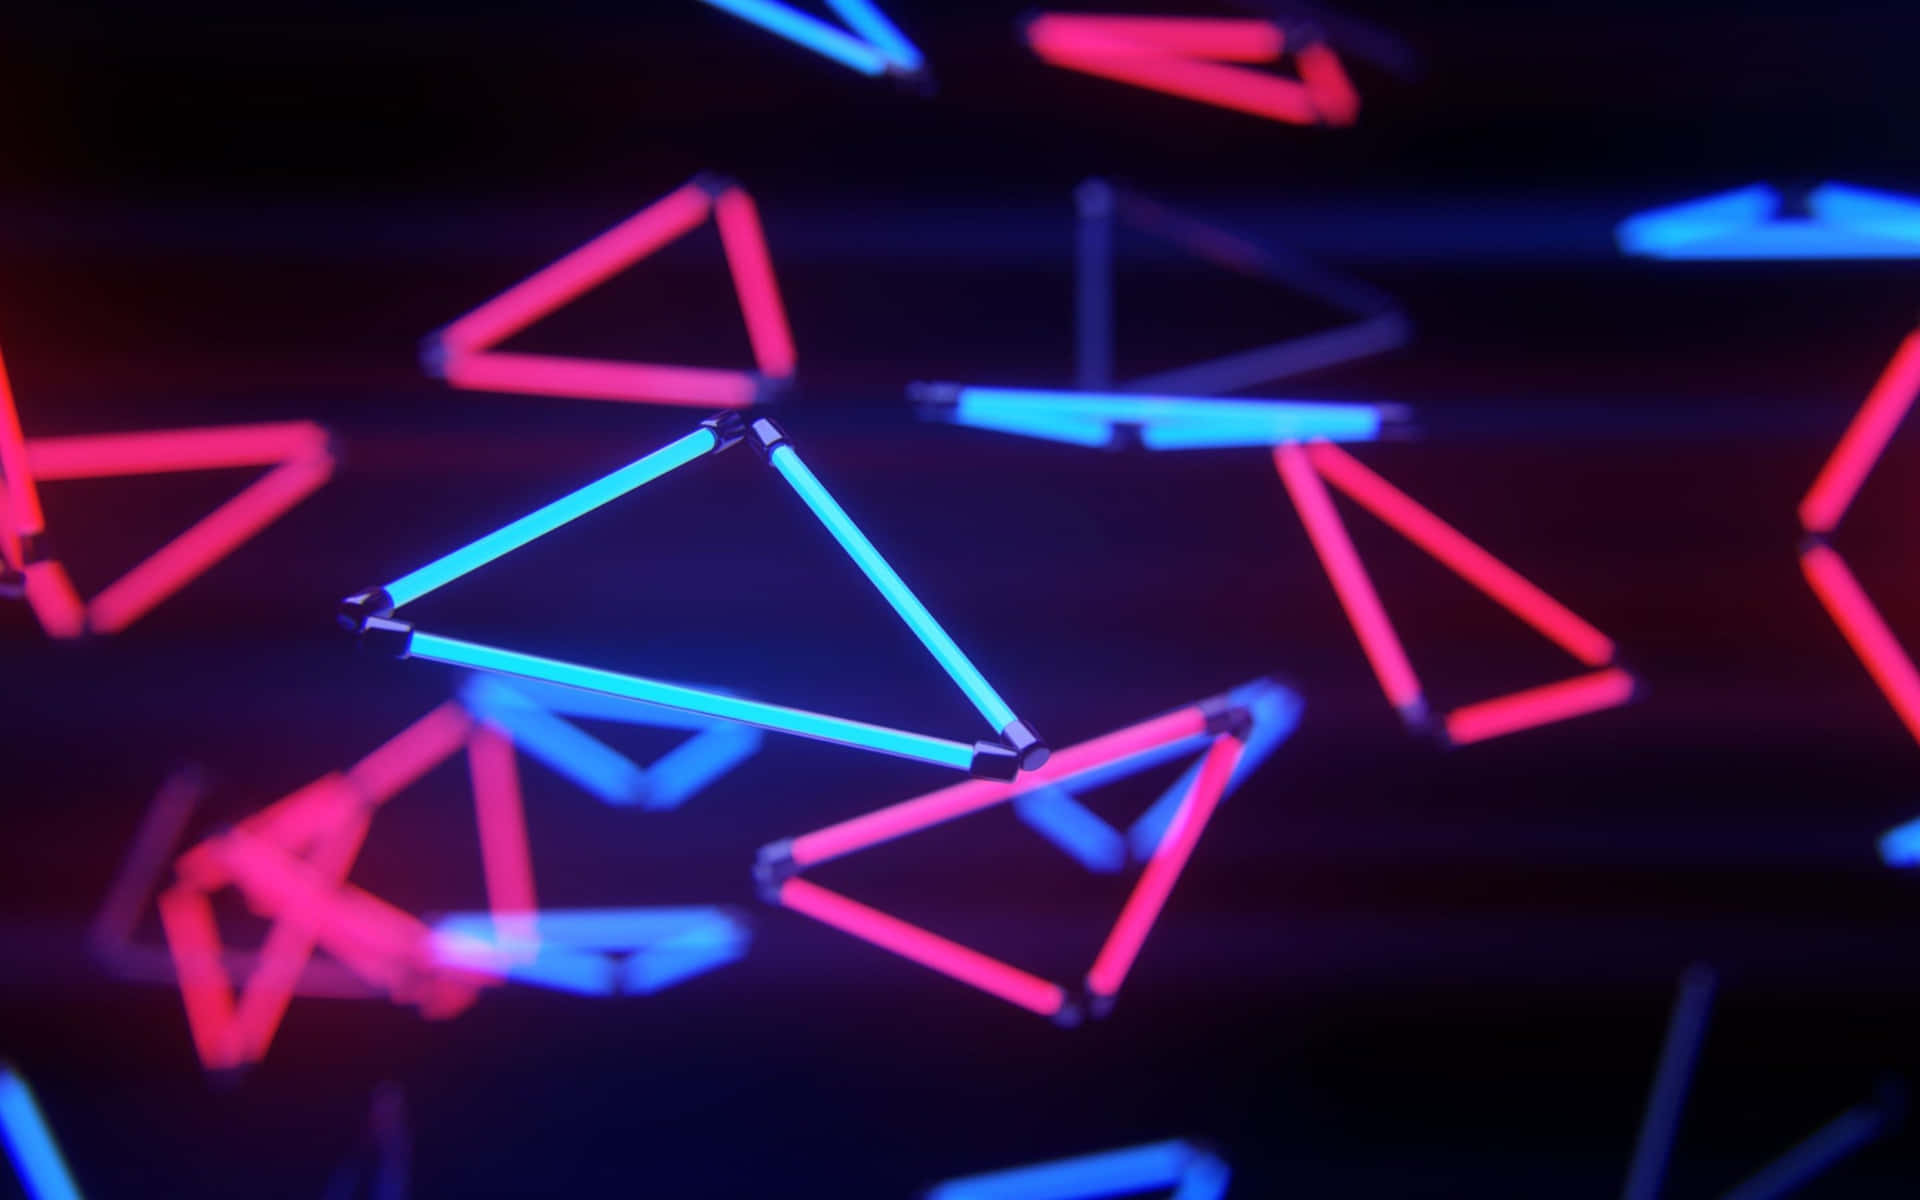 Blue And Pink Aesthetic Neon Triangles Flying Wallpaper